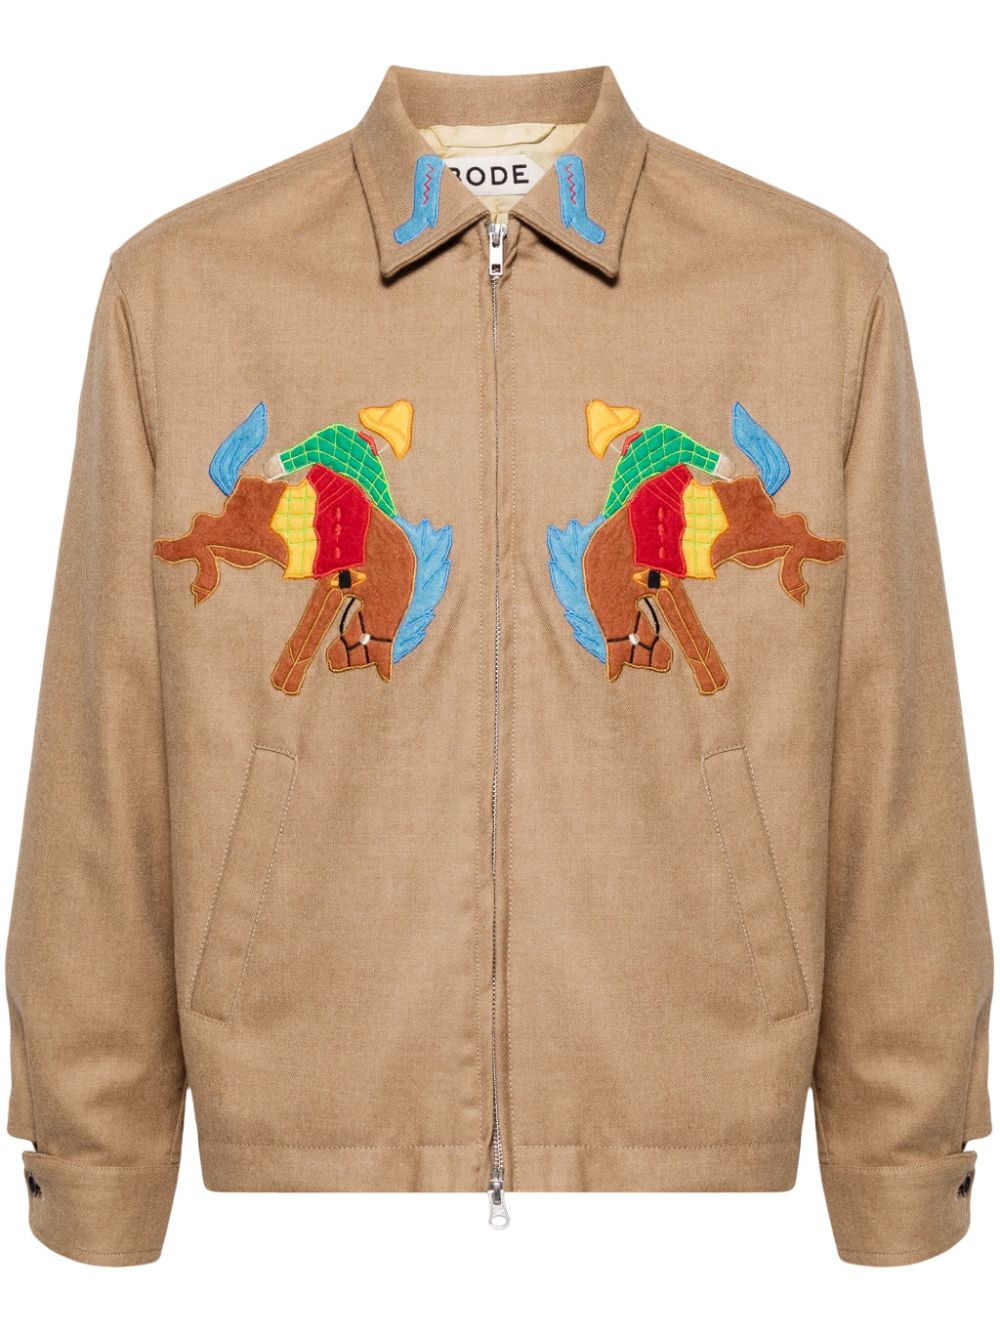 Bode Rodeo Ohio Embroidered Jacket In Brown